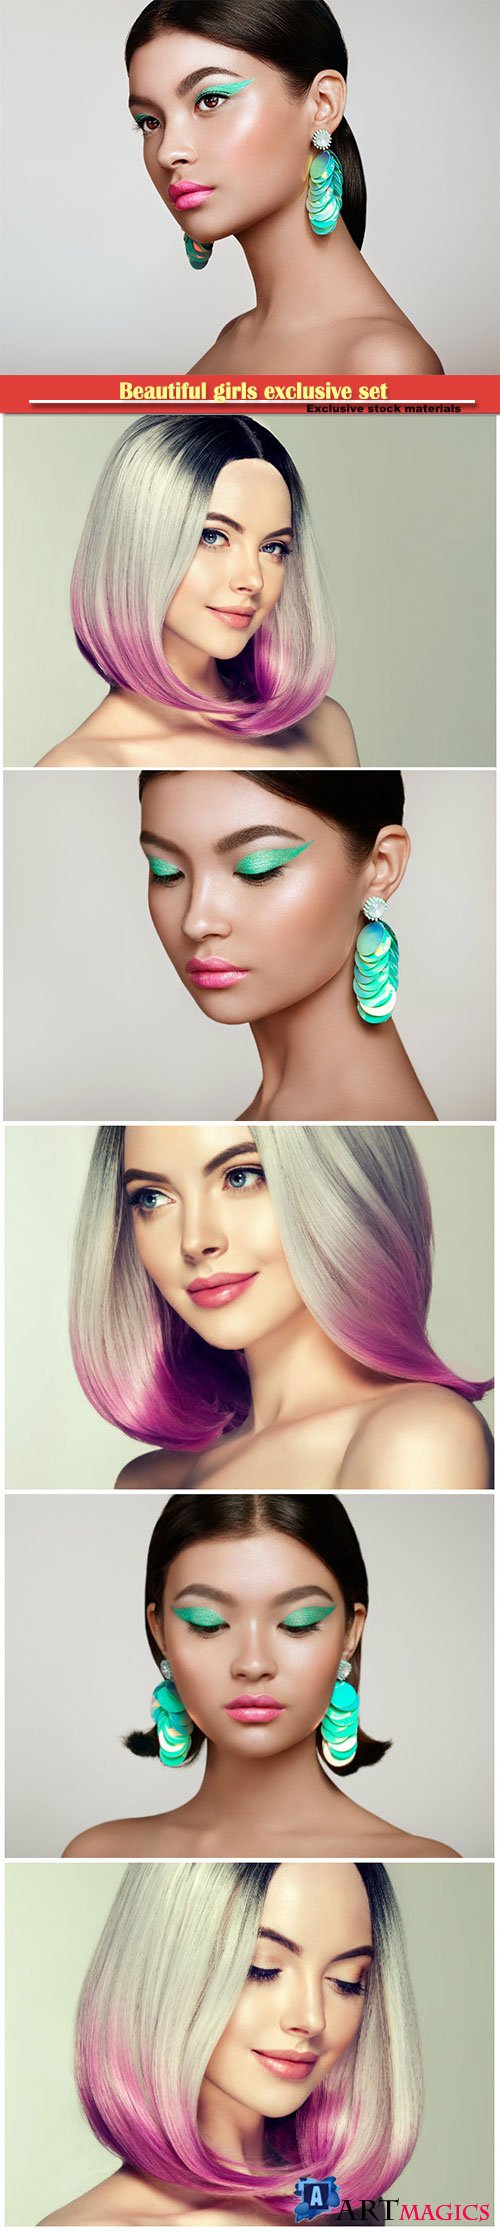 Fashion girls with makeup and dyed hair